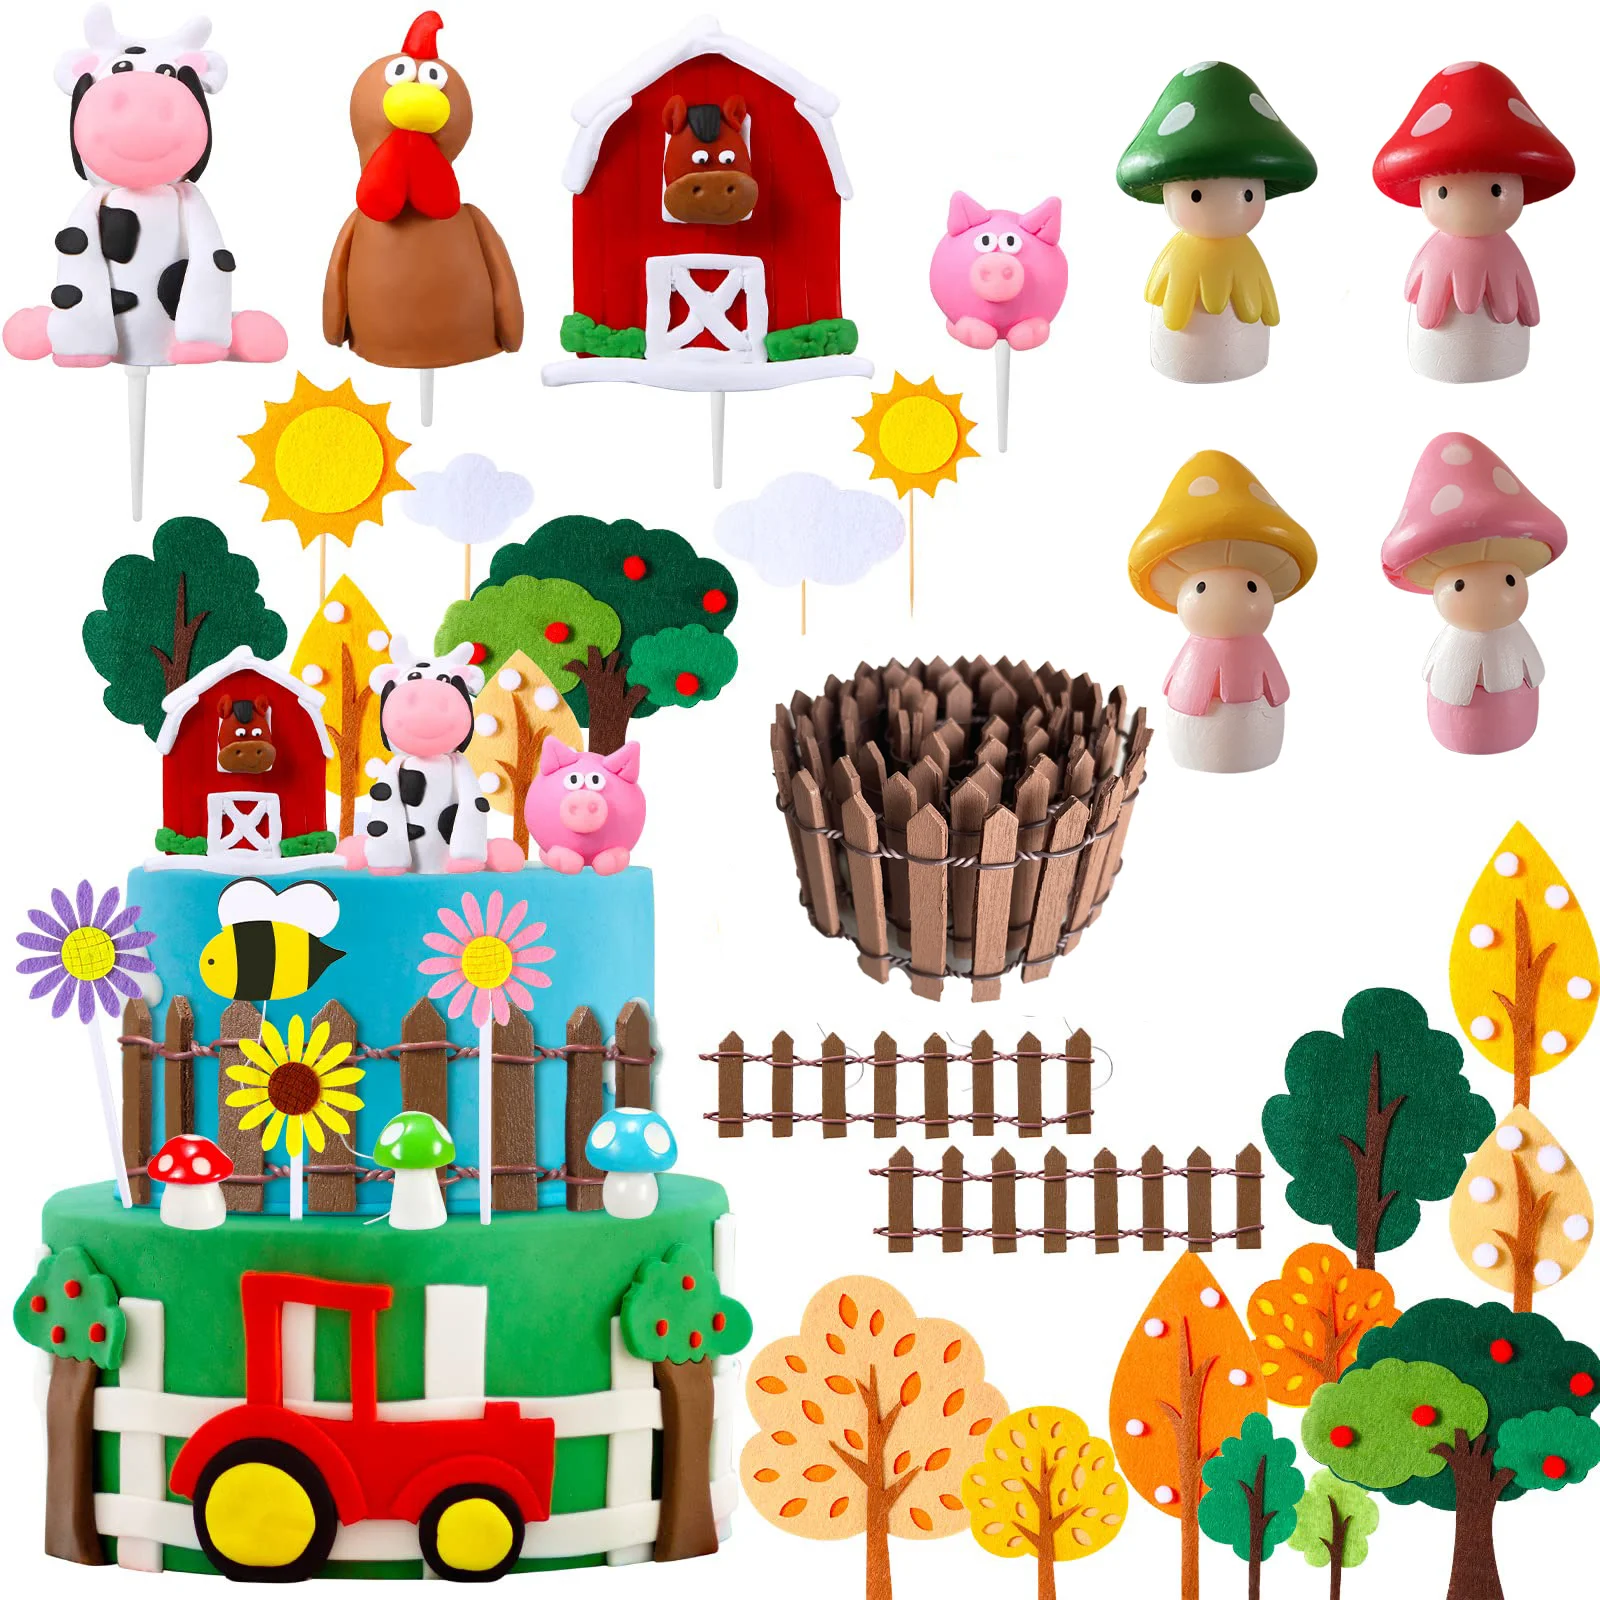 Farm Animal Cake Topper Children Birthday Cake Decoration Clay Cow Cupcake Toppers Baby Shower Barn Theme Party Supplies